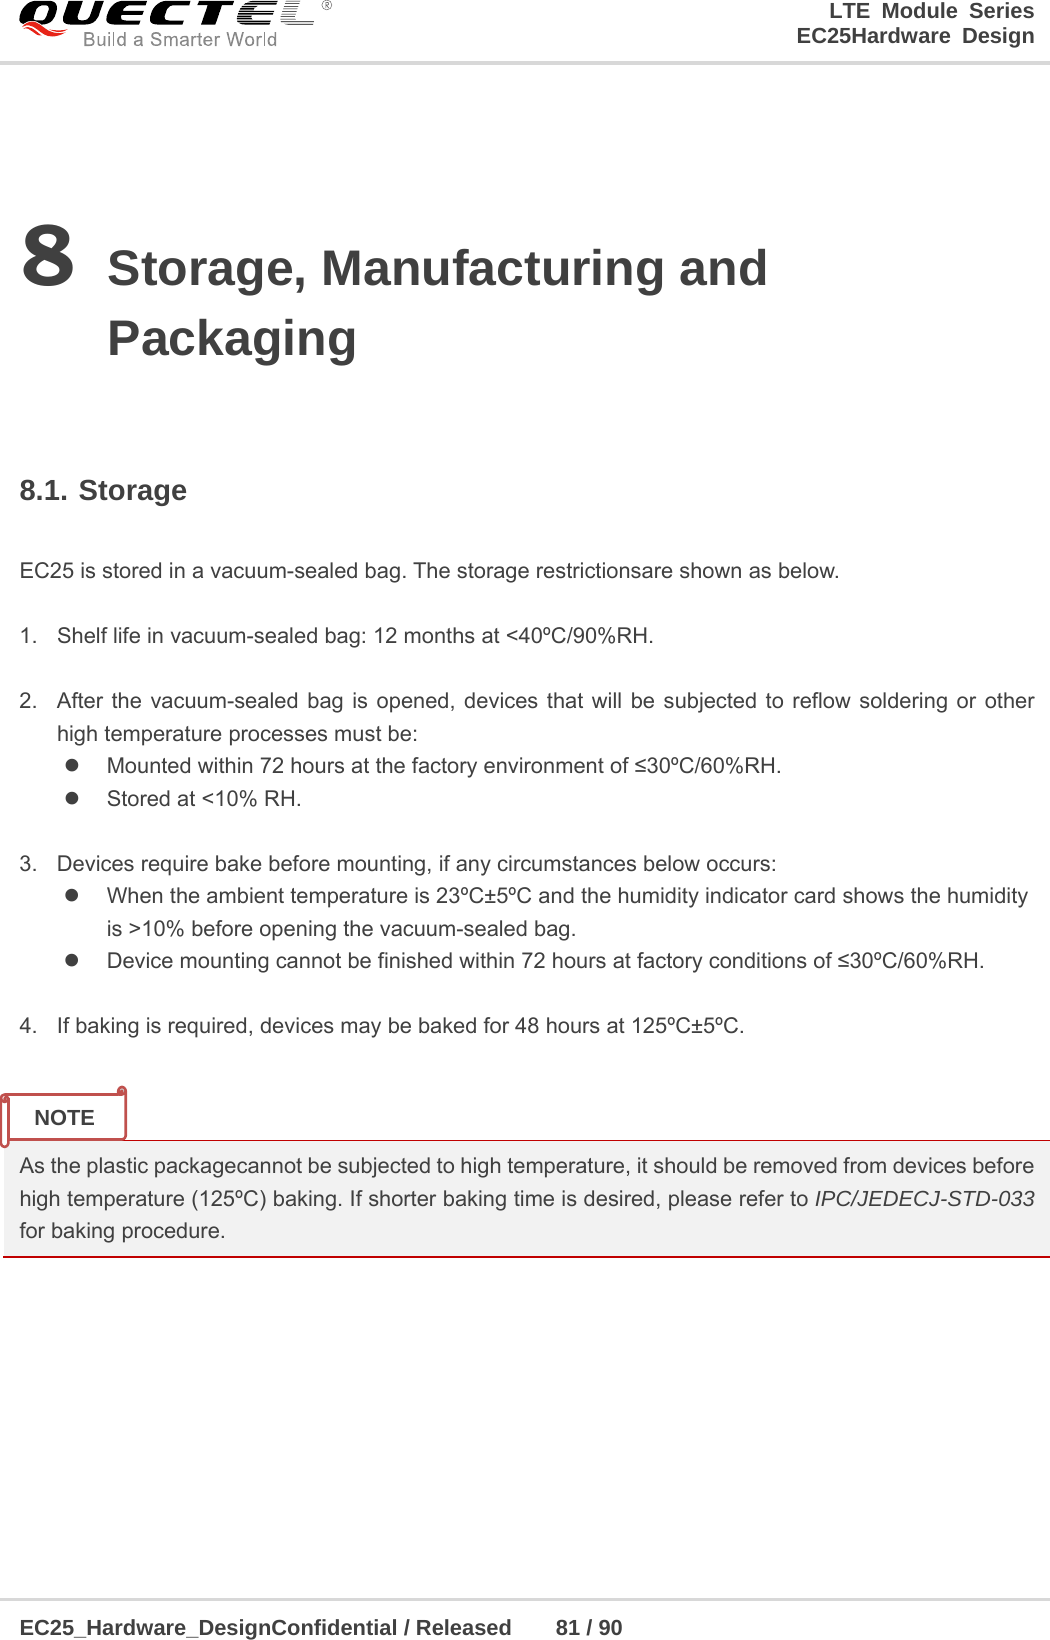 LTE Module Series                                                  EC25Hardware Design  EC25_Hardware_DesignConfidential / Released    81 / 90    8 Storage, Manufacturing and Packaging  8.1. Storage  EC25 is stored in a vacuum-sealed bag. The storage restrictionsare shown as below.    1.  Shelf life in vacuum-sealed bag: 12 months at &lt;40ºC/90%RH.    2.  After the vacuum-sealed bag is opened, devices that will be subjected to reflow soldering or other high temperature processes must be:   Mounted within 72 hours at the factory environment of ≤30ºC/60%RH.   Stored at &lt;10% RH.  3.  Devices require bake before mounting, if any circumstances below occurs:   When the ambient temperature is 23ºC±5ºC and the humidity indicator card shows the humidity     is &gt;10% before opening the vacuum-sealed bag.   Device mounting cannot be finished within 72 hours at factory conditions of ≤30ºC/60%RH.  4.  If baking is required, devices may be baked for 48 hours at 125ºC±5ºC.   As the plastic packagecannot be subjected to high temperature, it should be removed from devices before high temperature (125ºC) baking. If shorter baking time is desired, please refer to IPC/JEDECJ-STD-033 for baking procedure.      NOTE 